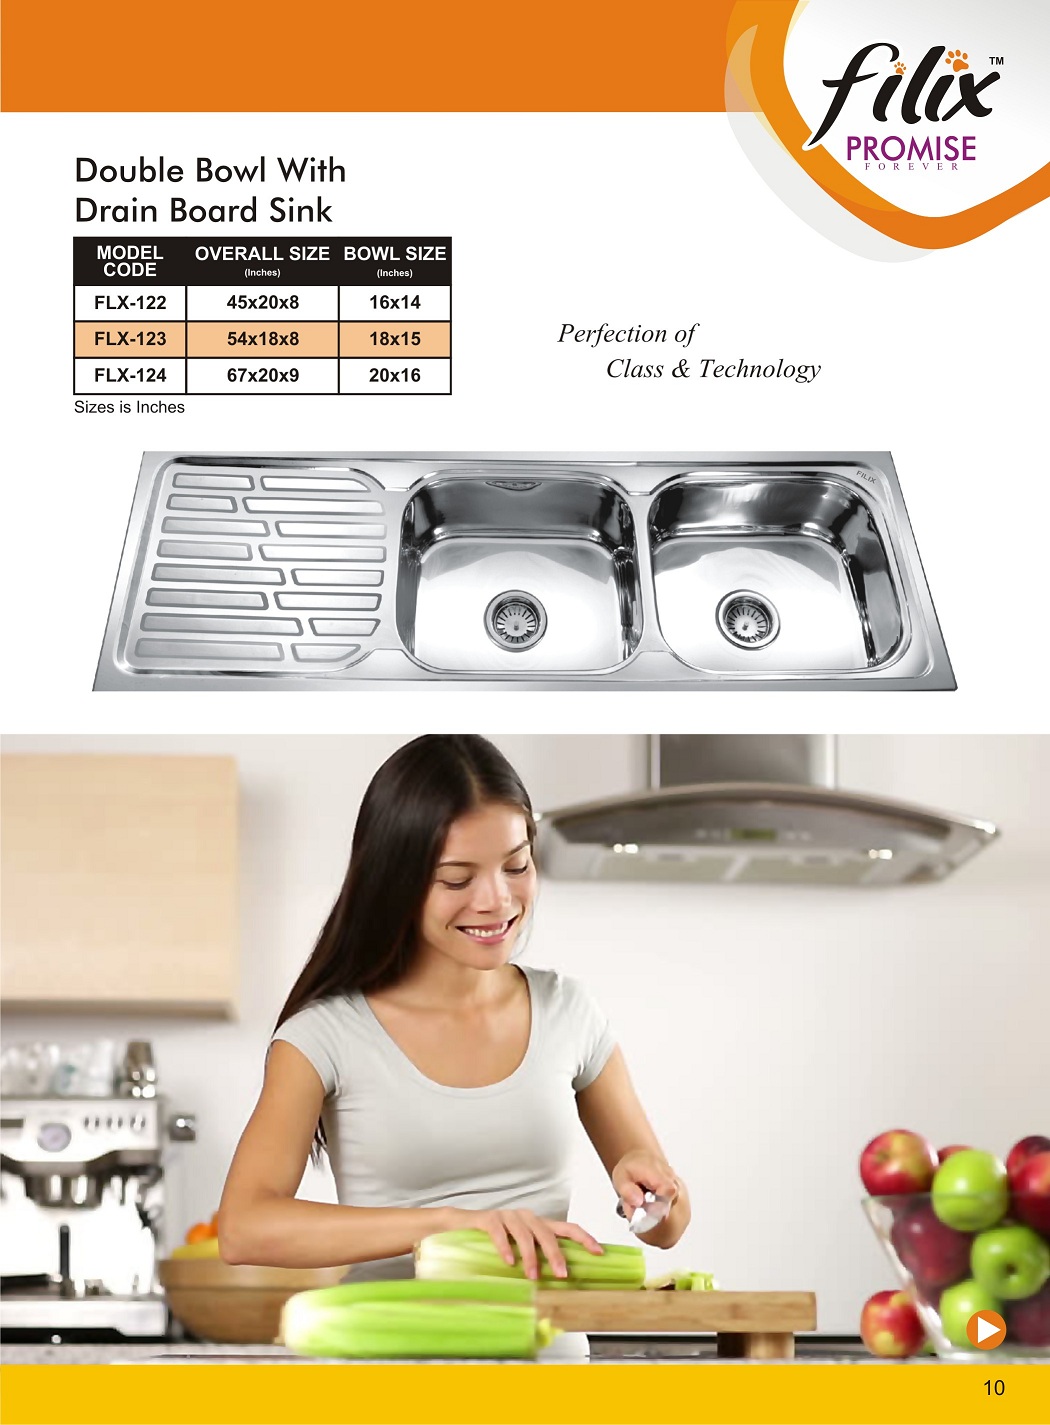 filix Double Bowl With Drain Board Sink